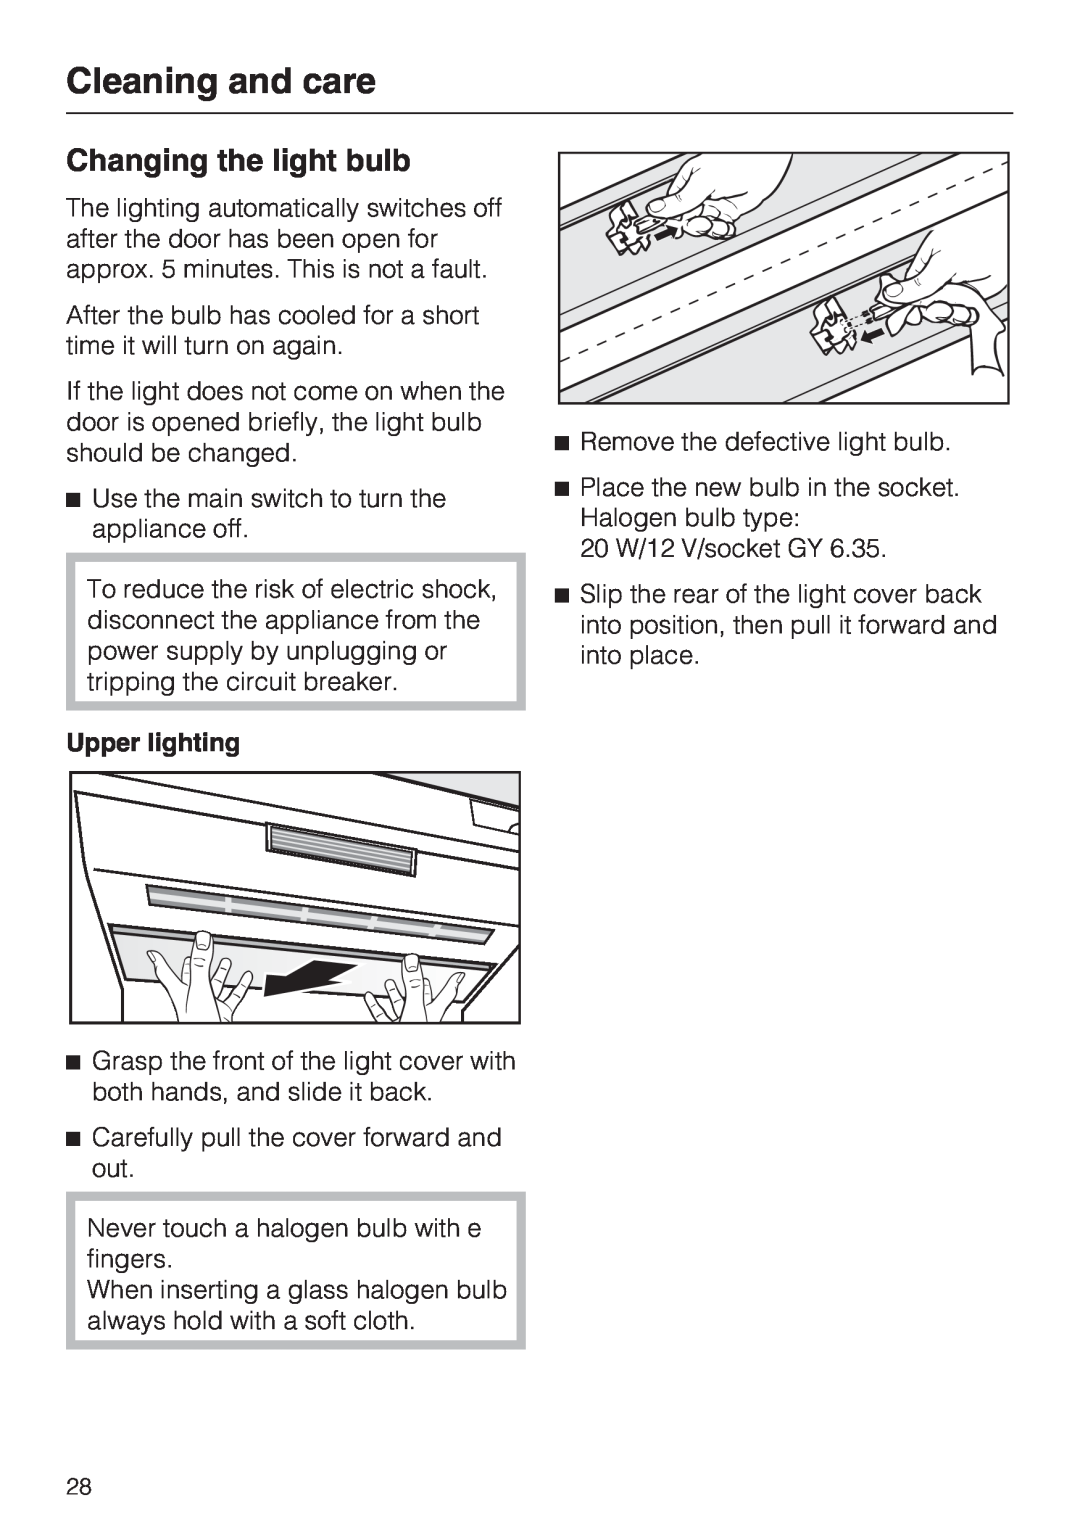 Miele F 1411 Vi installation instructions Changing the light bulb, Cleaning and care, Upper lighting 